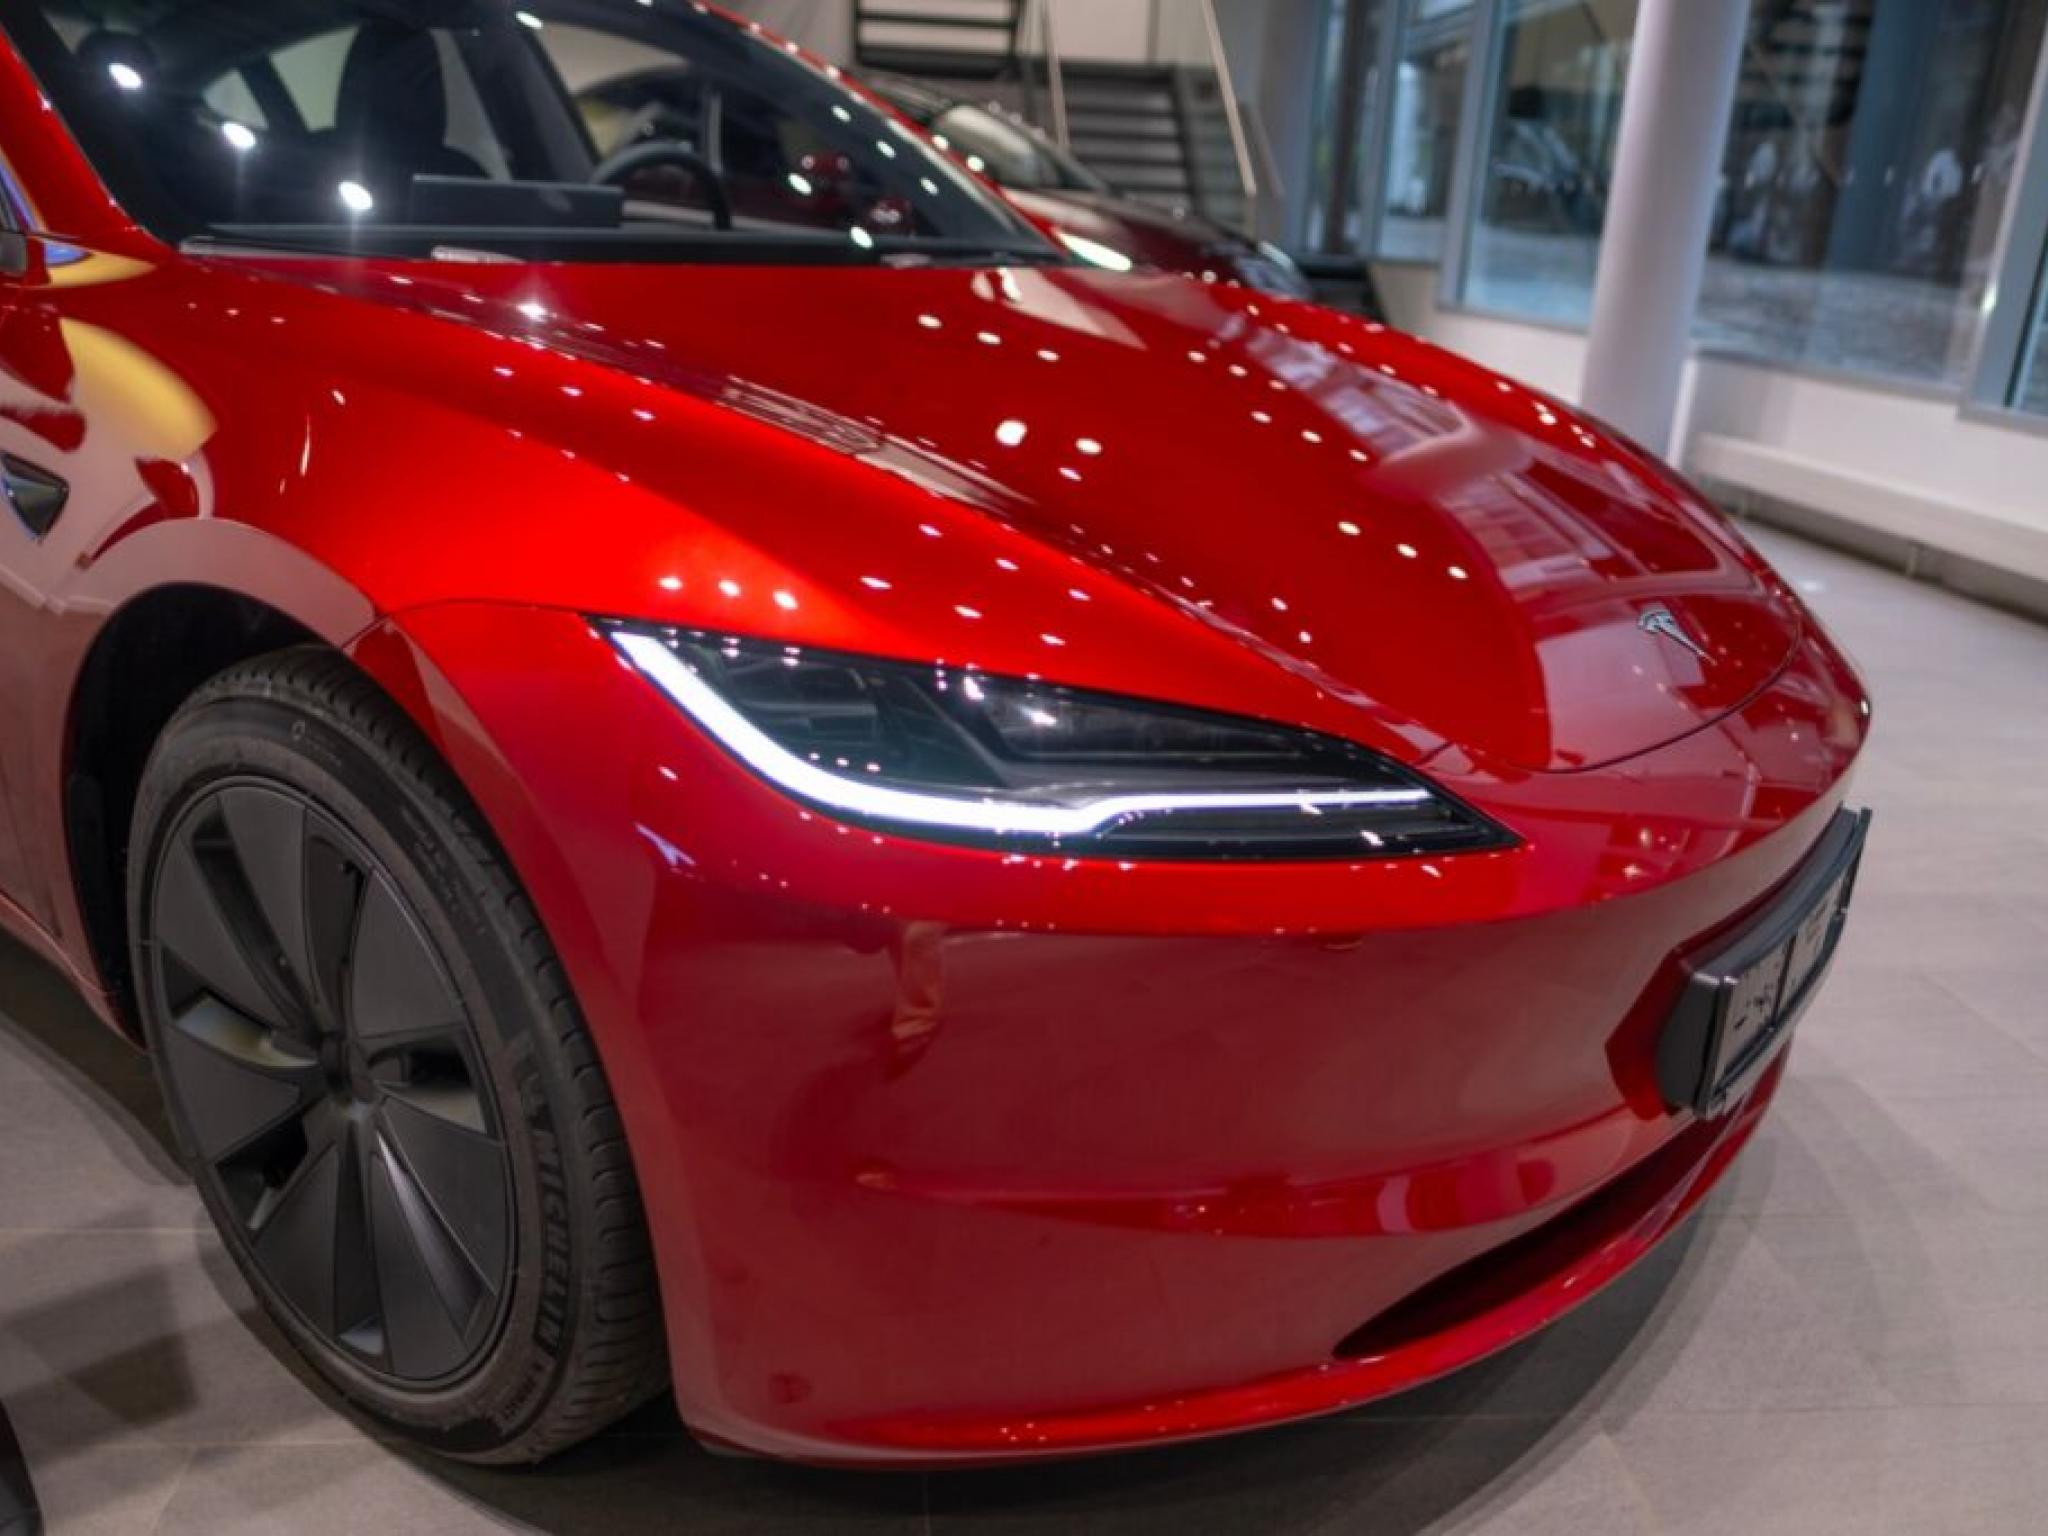  tesla-hikes-model-3-prices-in-germany-after-increase-in-tariffs-on-china-made-evs 